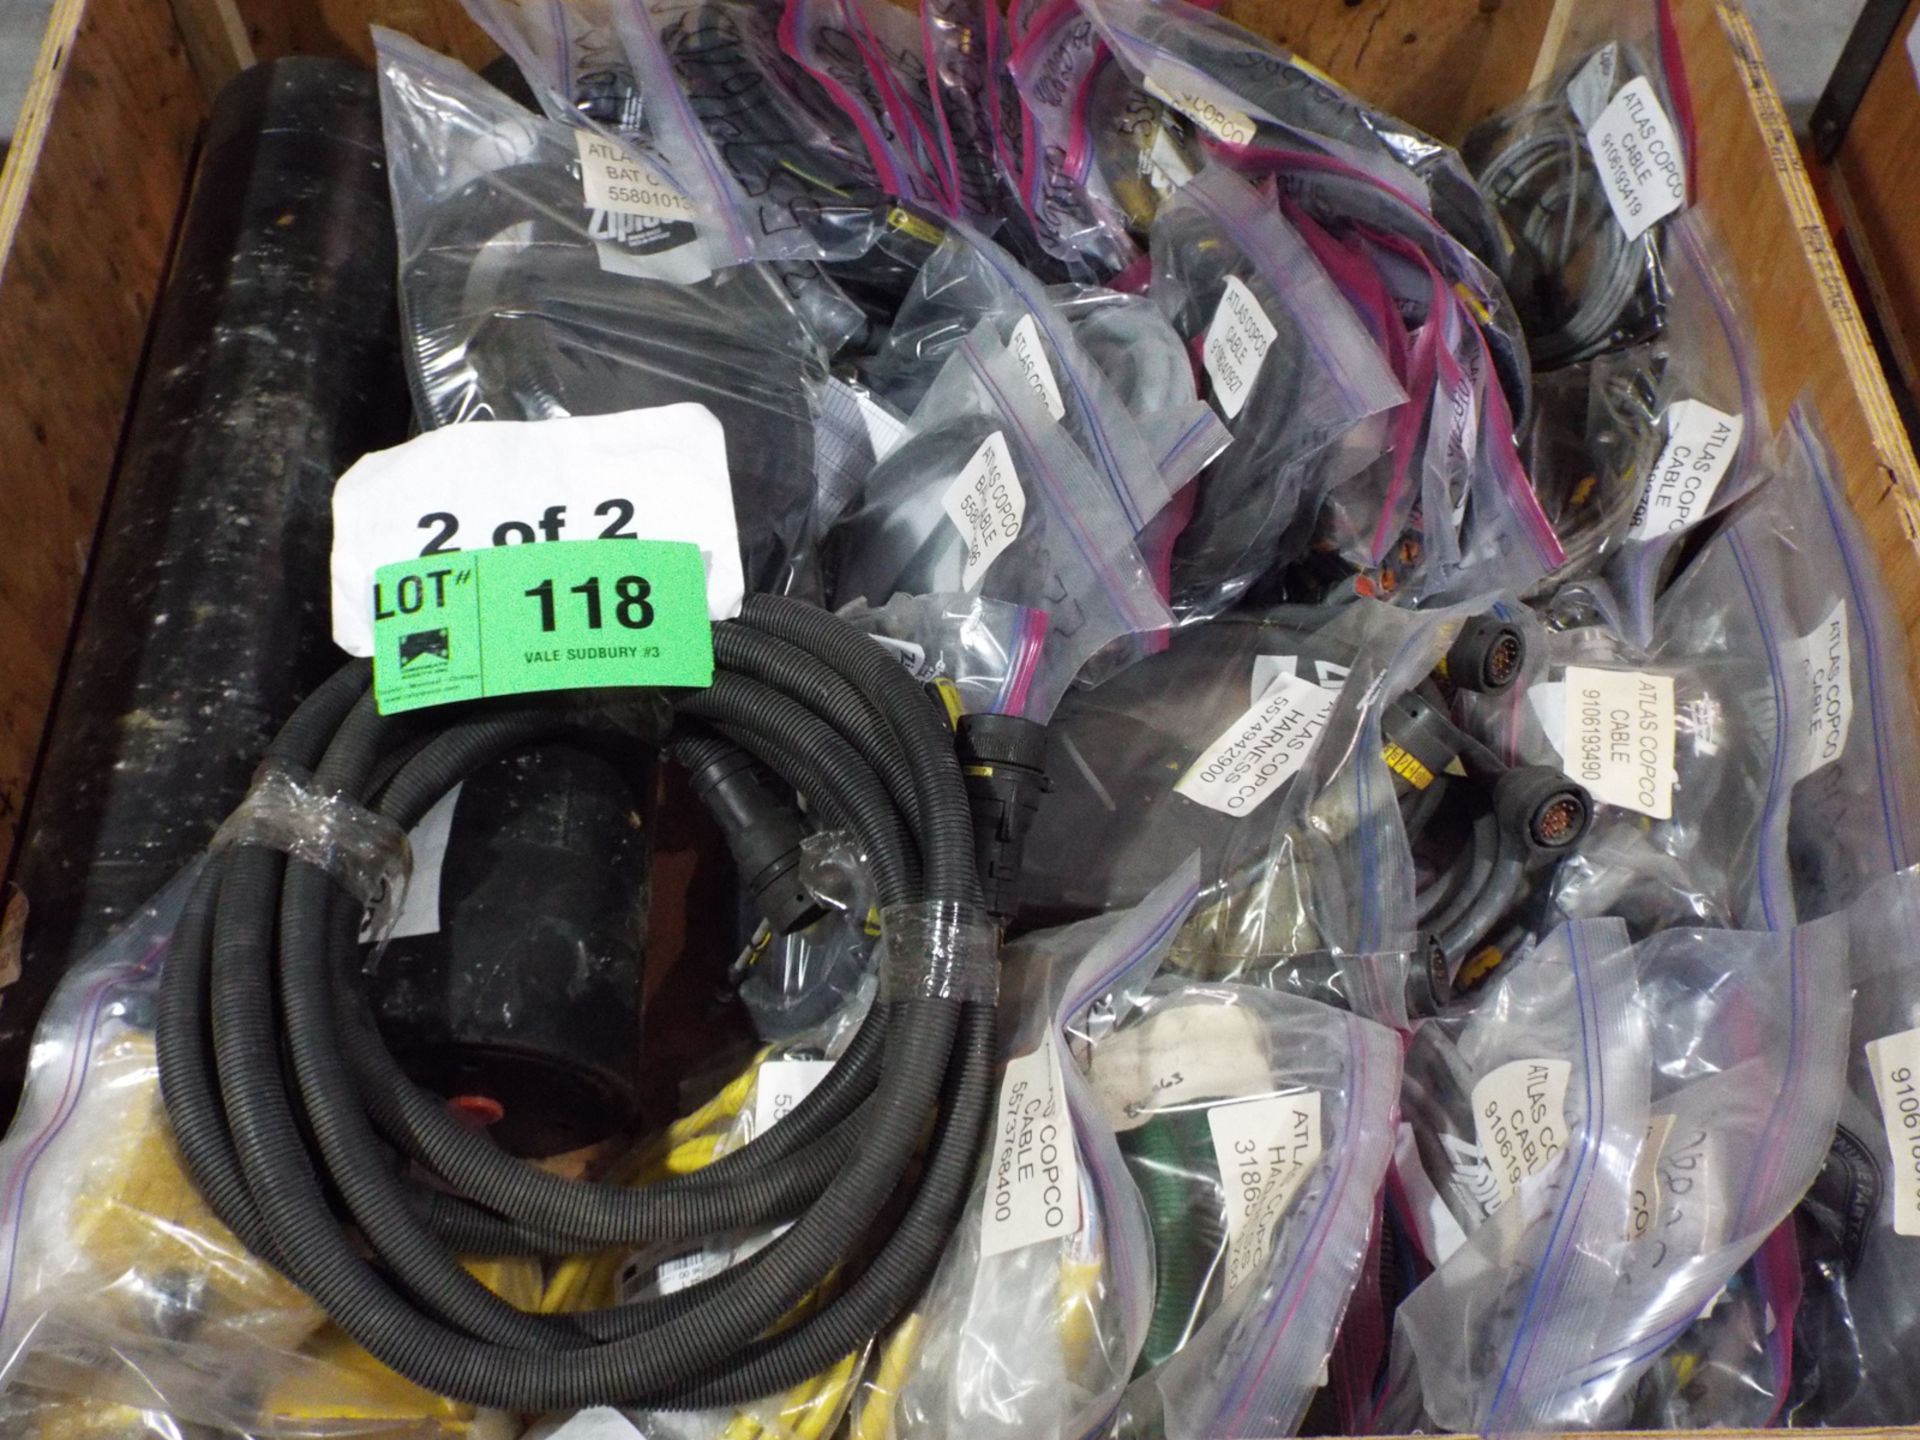 LOT/ ATLAS COPCO PARTS INCLUDING BUSHING STEEL, CONE, BAT CABLE, AND OTHER CABLES/HARNESSES - Image 8 of 16